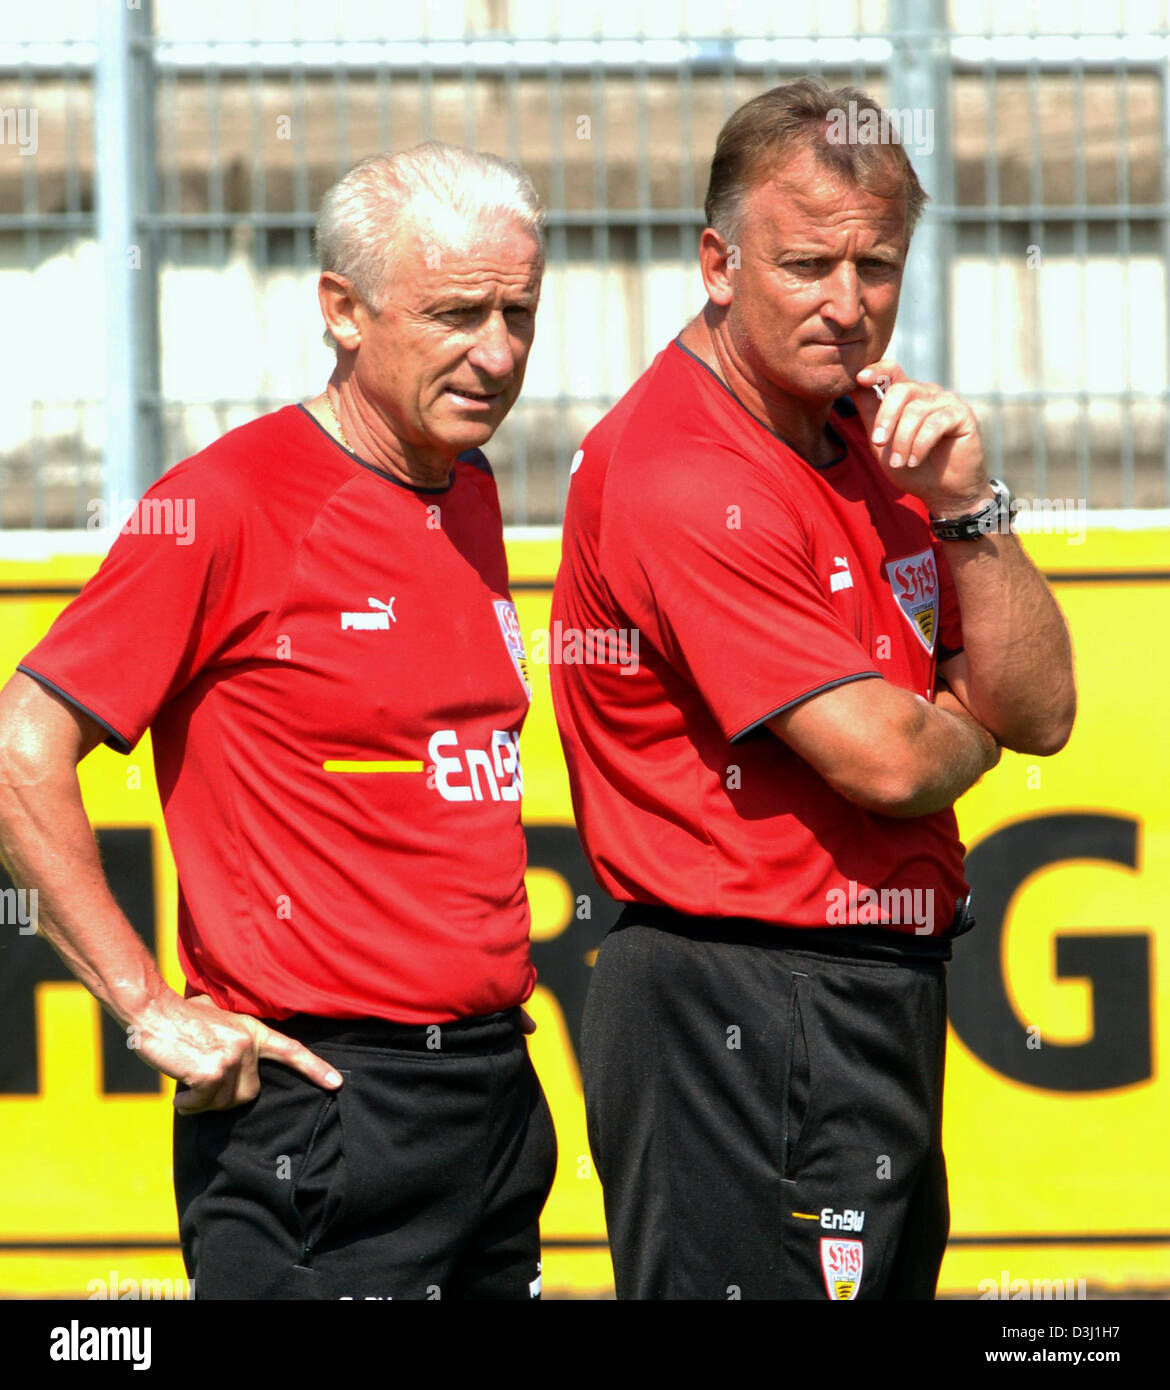 (dpa) - Head Coach of German Bundesliga club VfB Stuttgart Italian Giovanni Trapattoni (L) watches the players train in Stuttgart, Germany, 27 June 2005. Besides Trappatoni stands Assistant Coach German soccer legend Andreas Brehme. Stock Photo